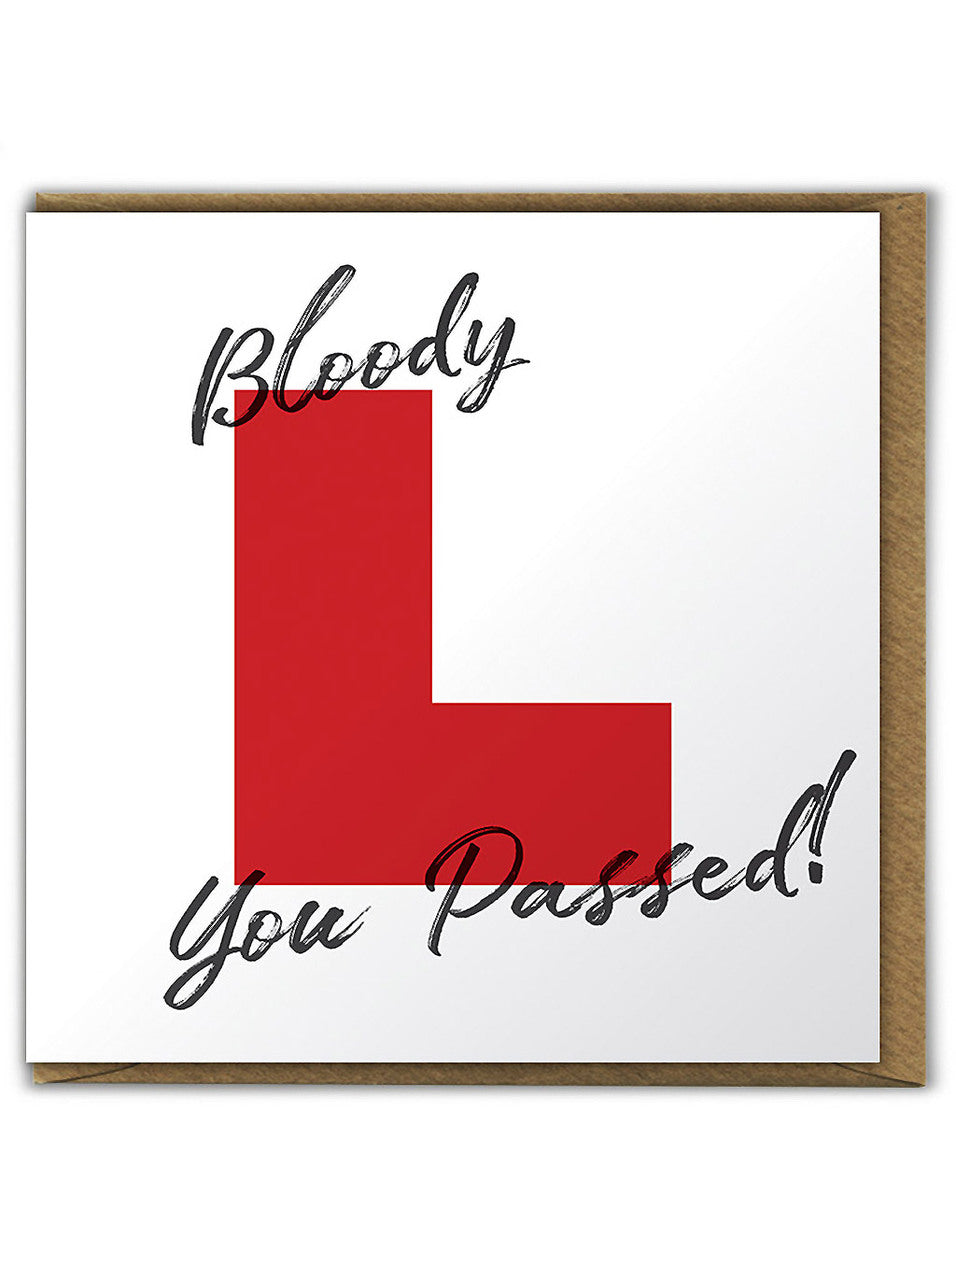 Bloody L You Passed